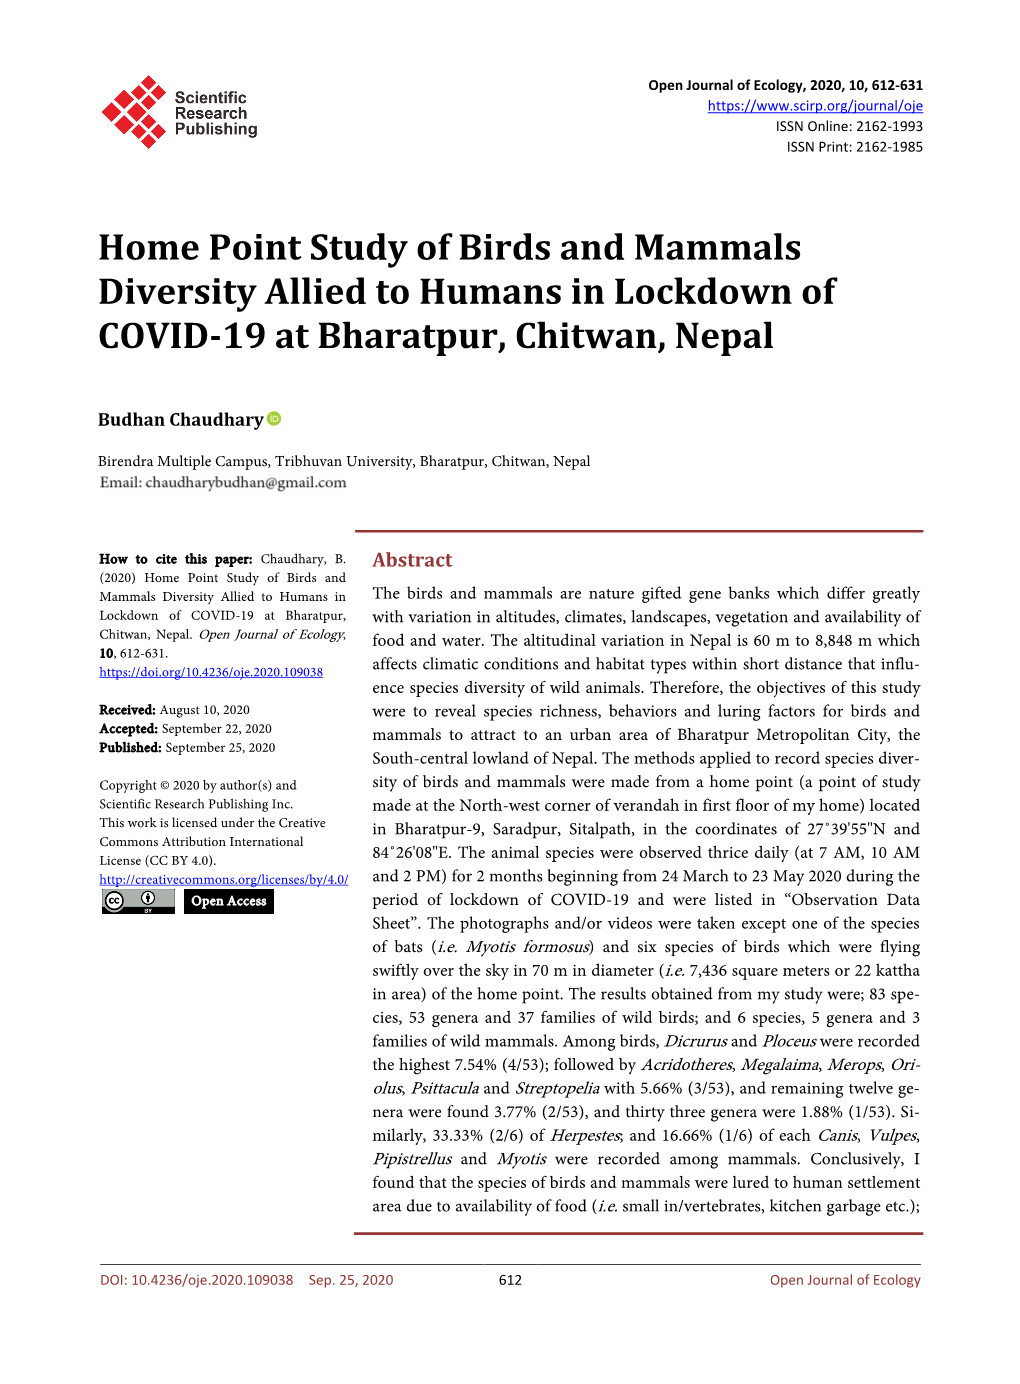 Home Point Study of Birds and Mammals Diversity Allied to Humans in Lockdown of COVID-19 at Bharatpur, Chitwan, Nepal